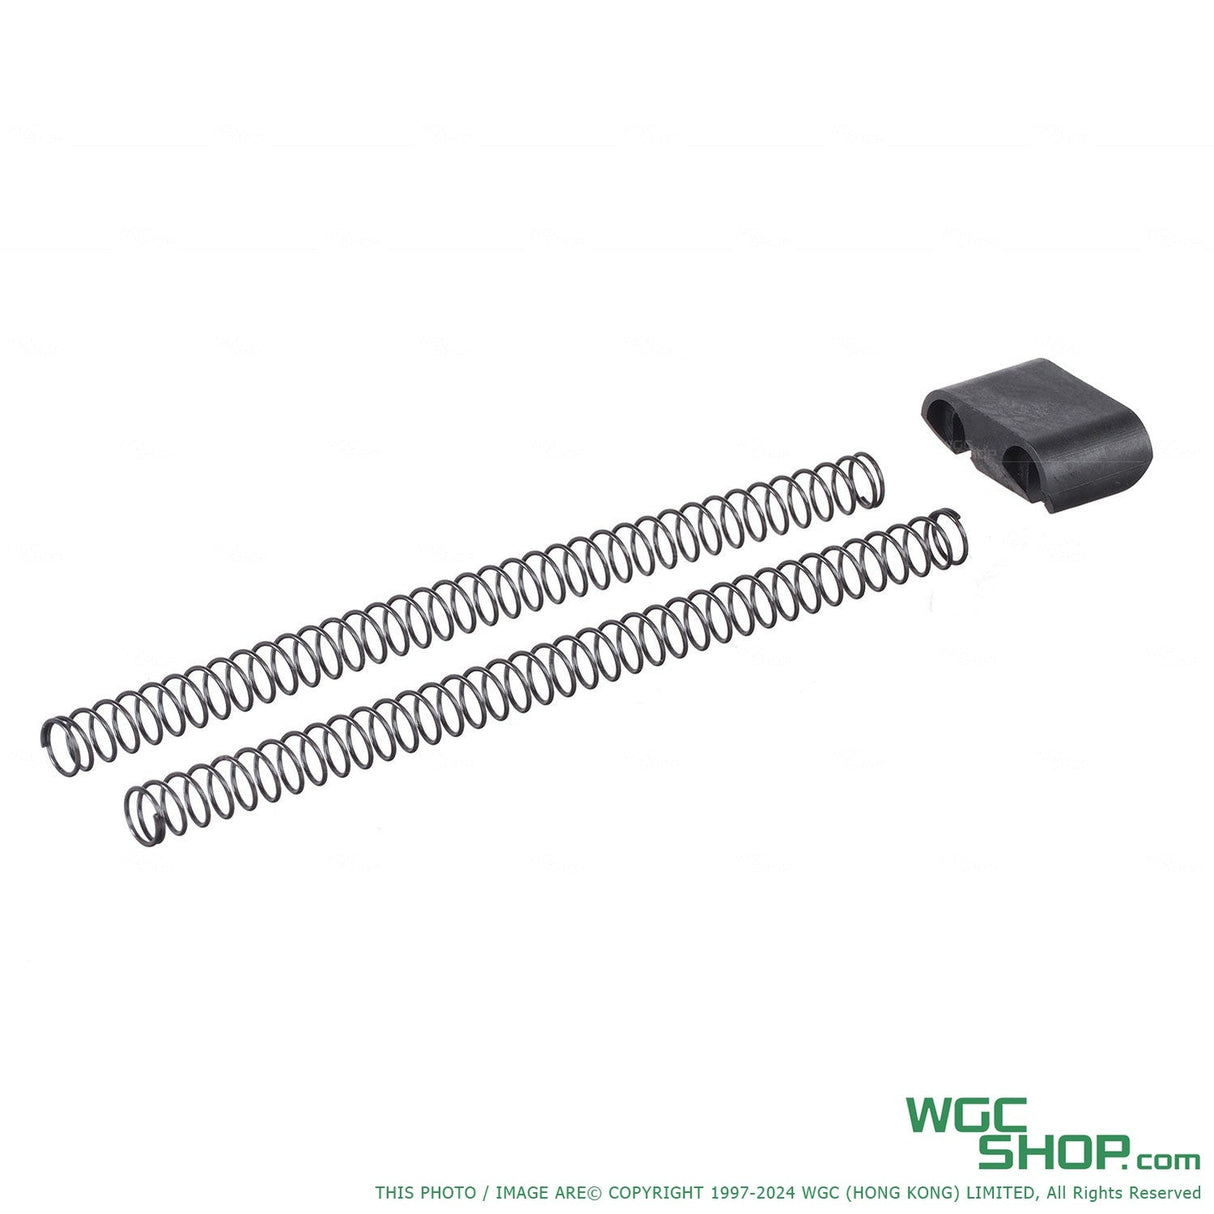 APFG Original Parts - MPX GBB Recoil Rod Base and Hammer Spring ( 04-20 / 04-18 )